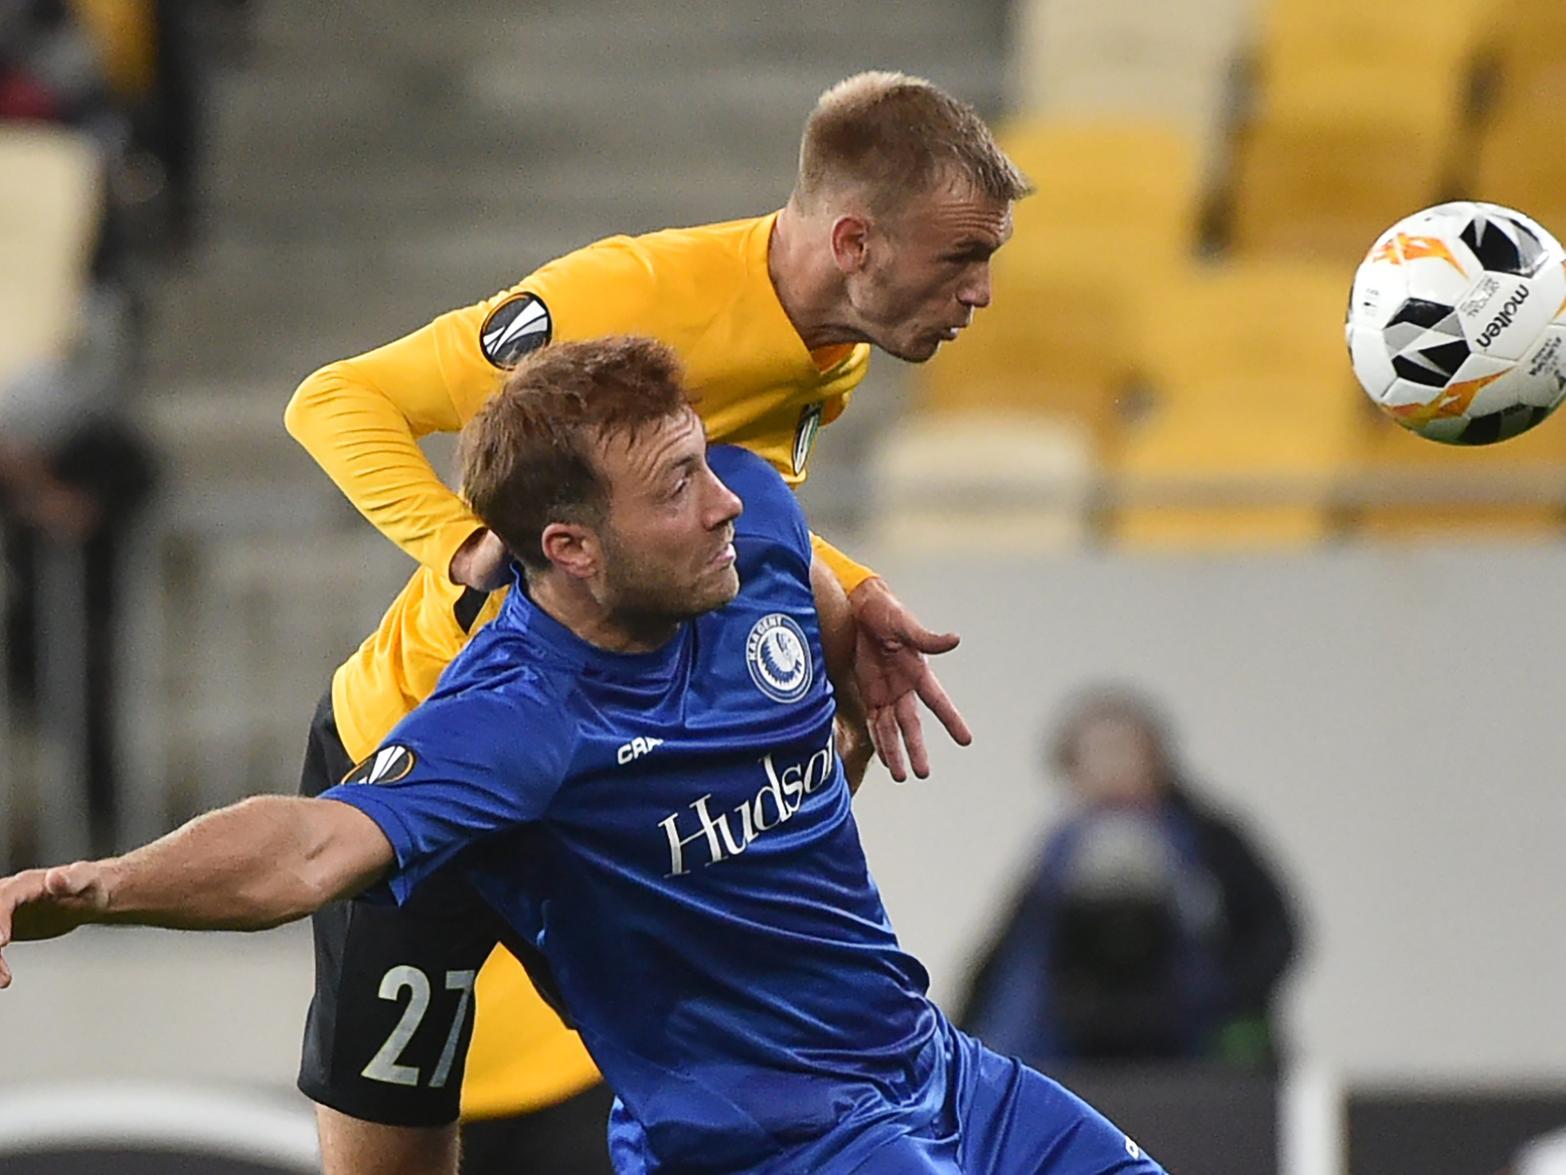 Gent striker Laurent Depoitre, who left Huddersfield Town last summer, has suggested that a lack of 'trust' of the staff and fans sparked his switch to the Belgian powerhouse. (Sport Witness)